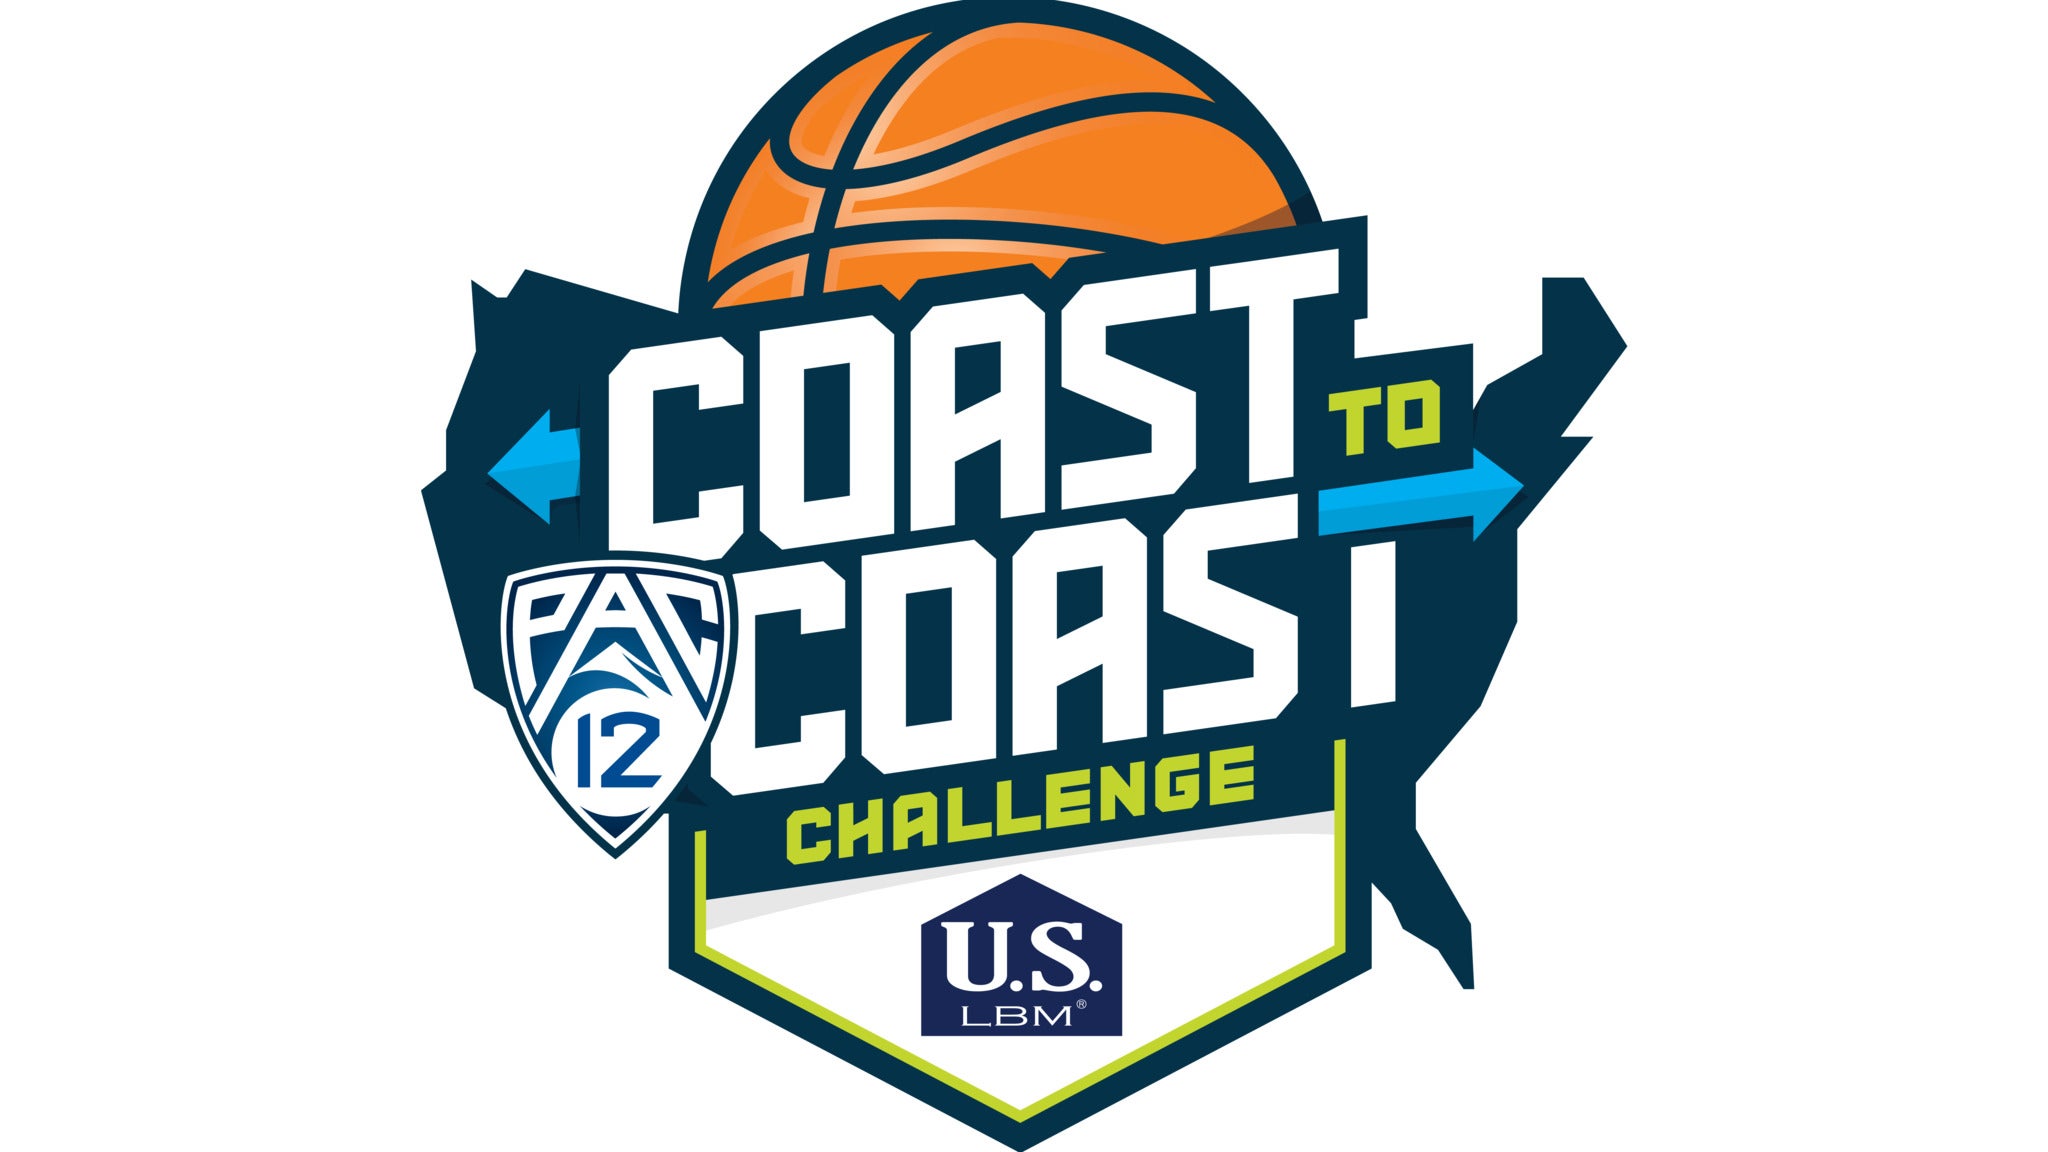 Pac-12 US LBM Coast-to-Coast Challenge: Baylor Men & Women's Basketbal presale code for show tickets in Dallas, TX (American Airlines Center)